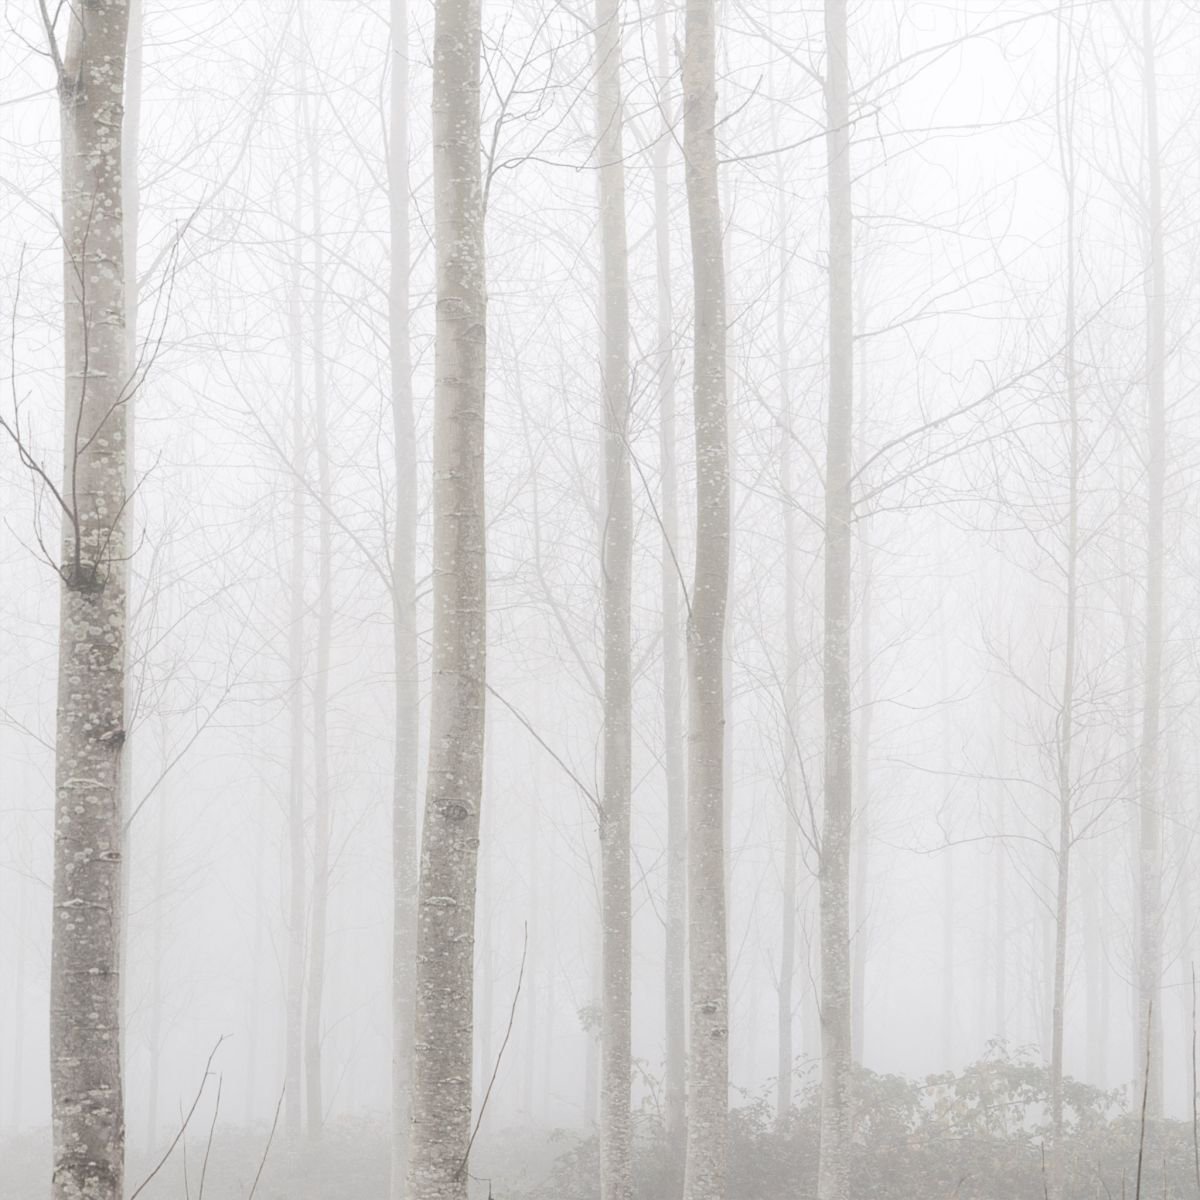 Misty Woods by Tracie Callaghan